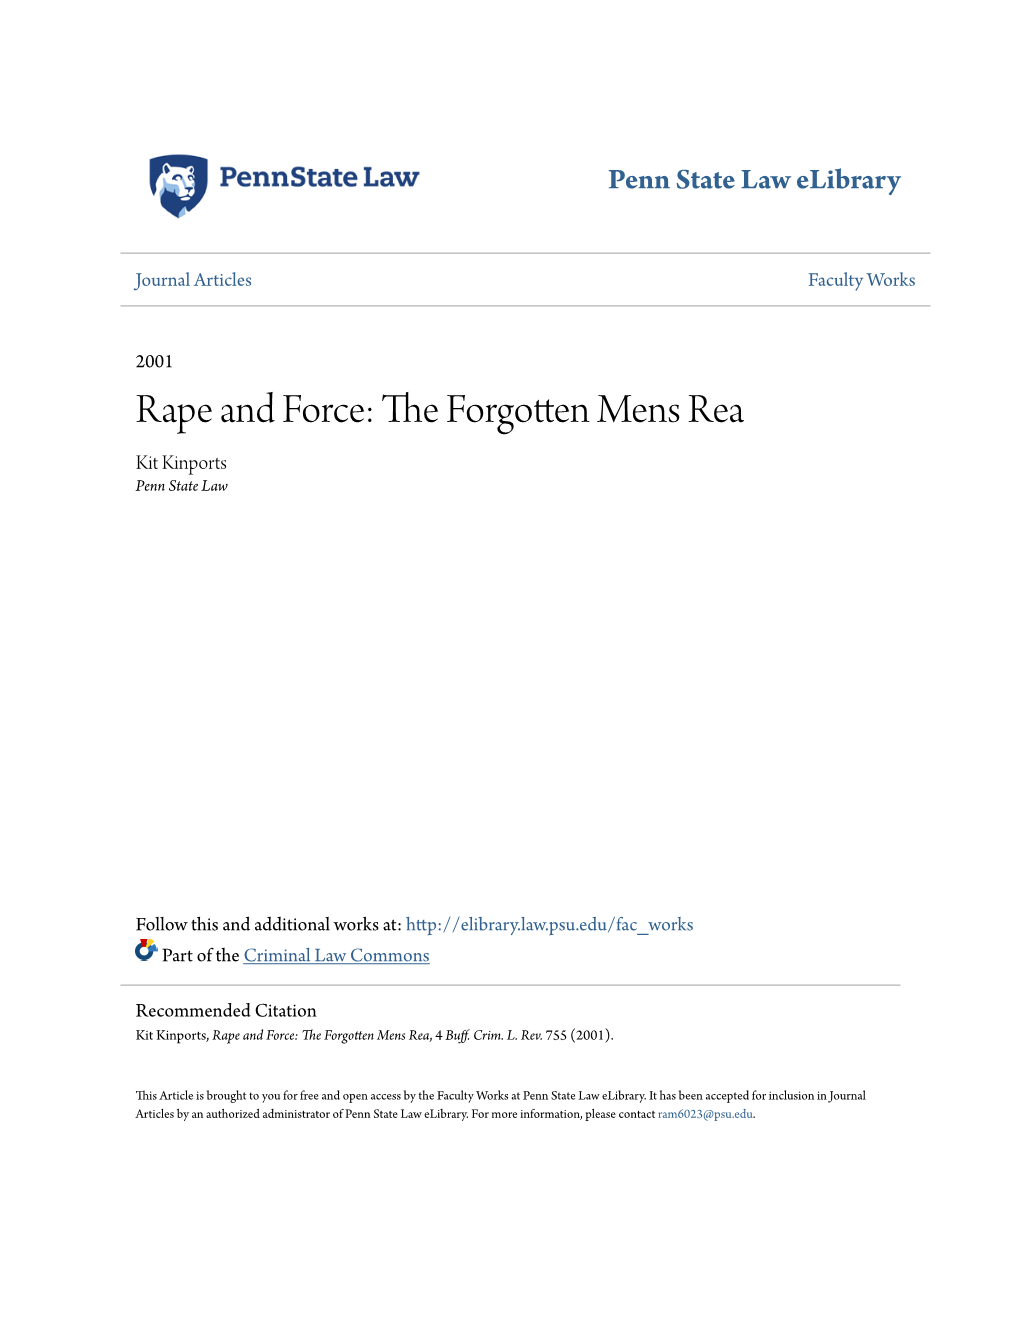 Rape and Force: the Forgotten Mens Rea, 4 Buff